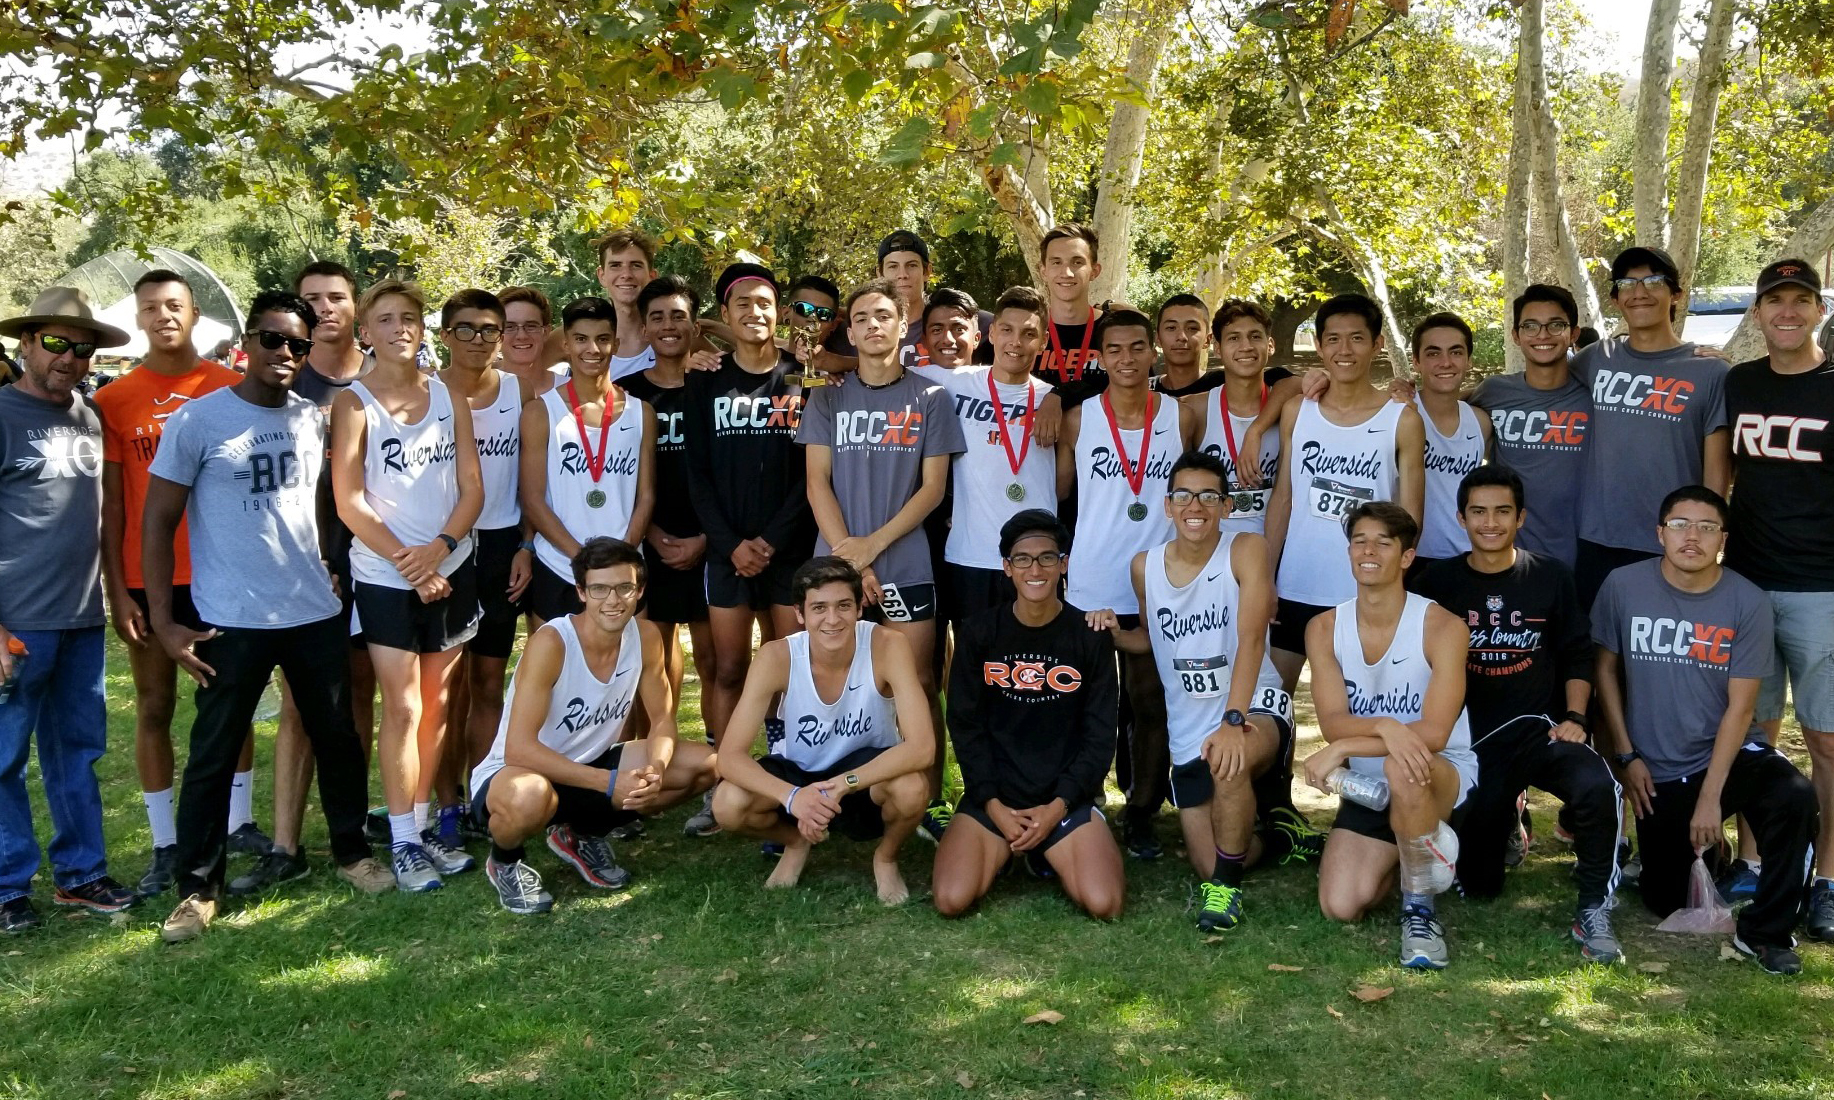 Men’s Cross Country Boast Individual Career-Best in Gold Medal Showing at Brubaker Invitational